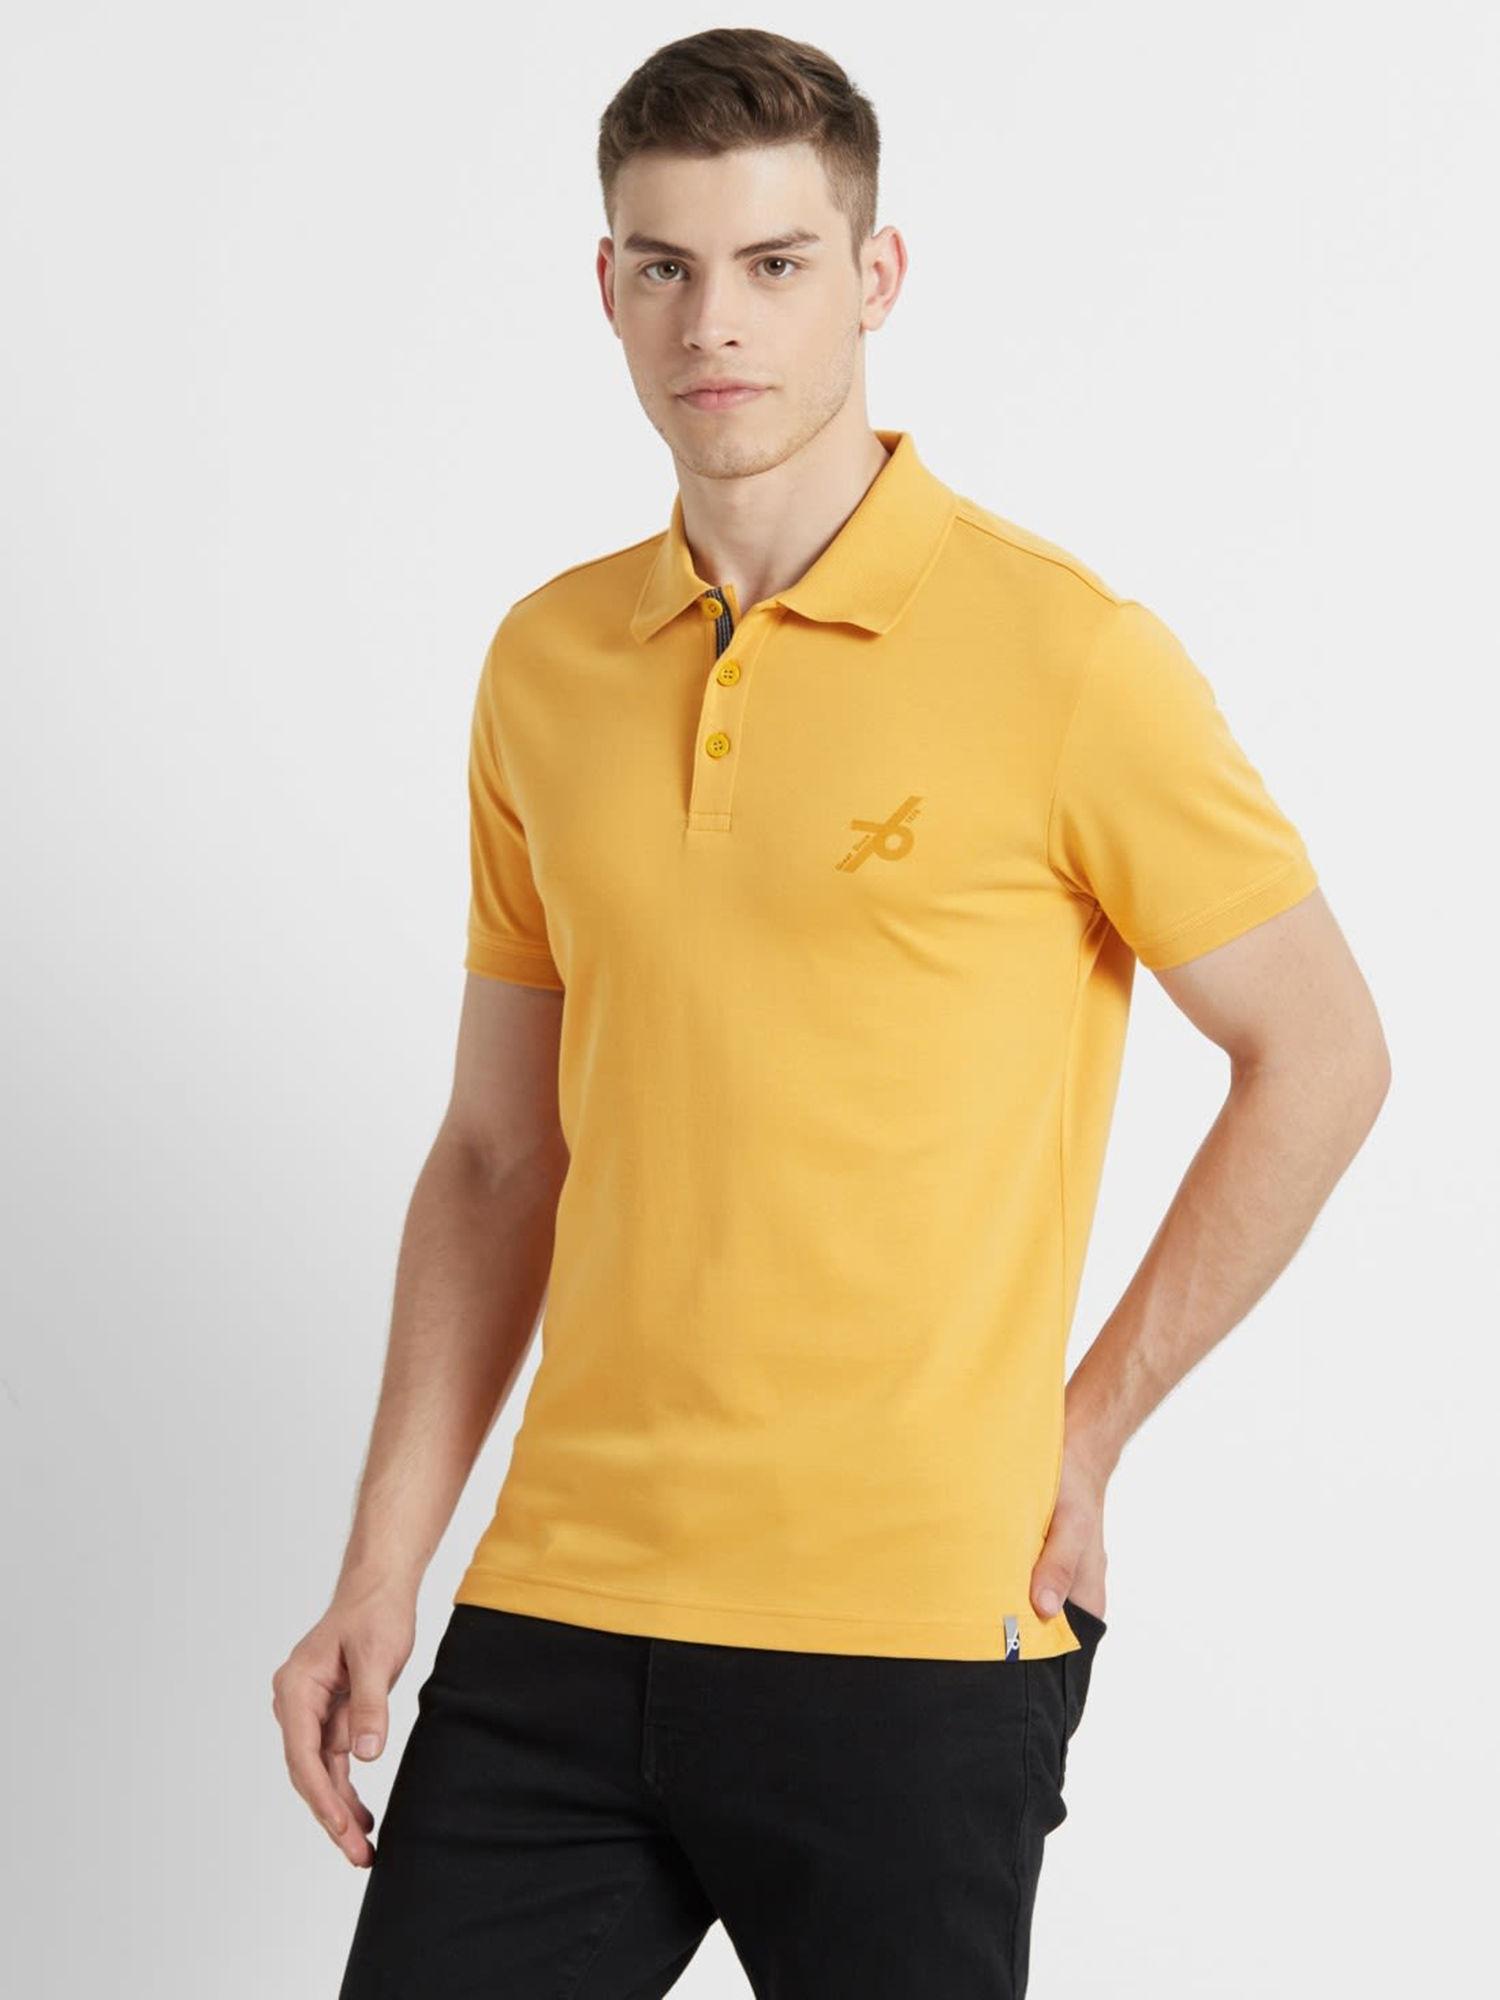 3911-men's-super-combed-cotton-rich-solid-half-sleeve-polo-t-shirt---burnt-gold